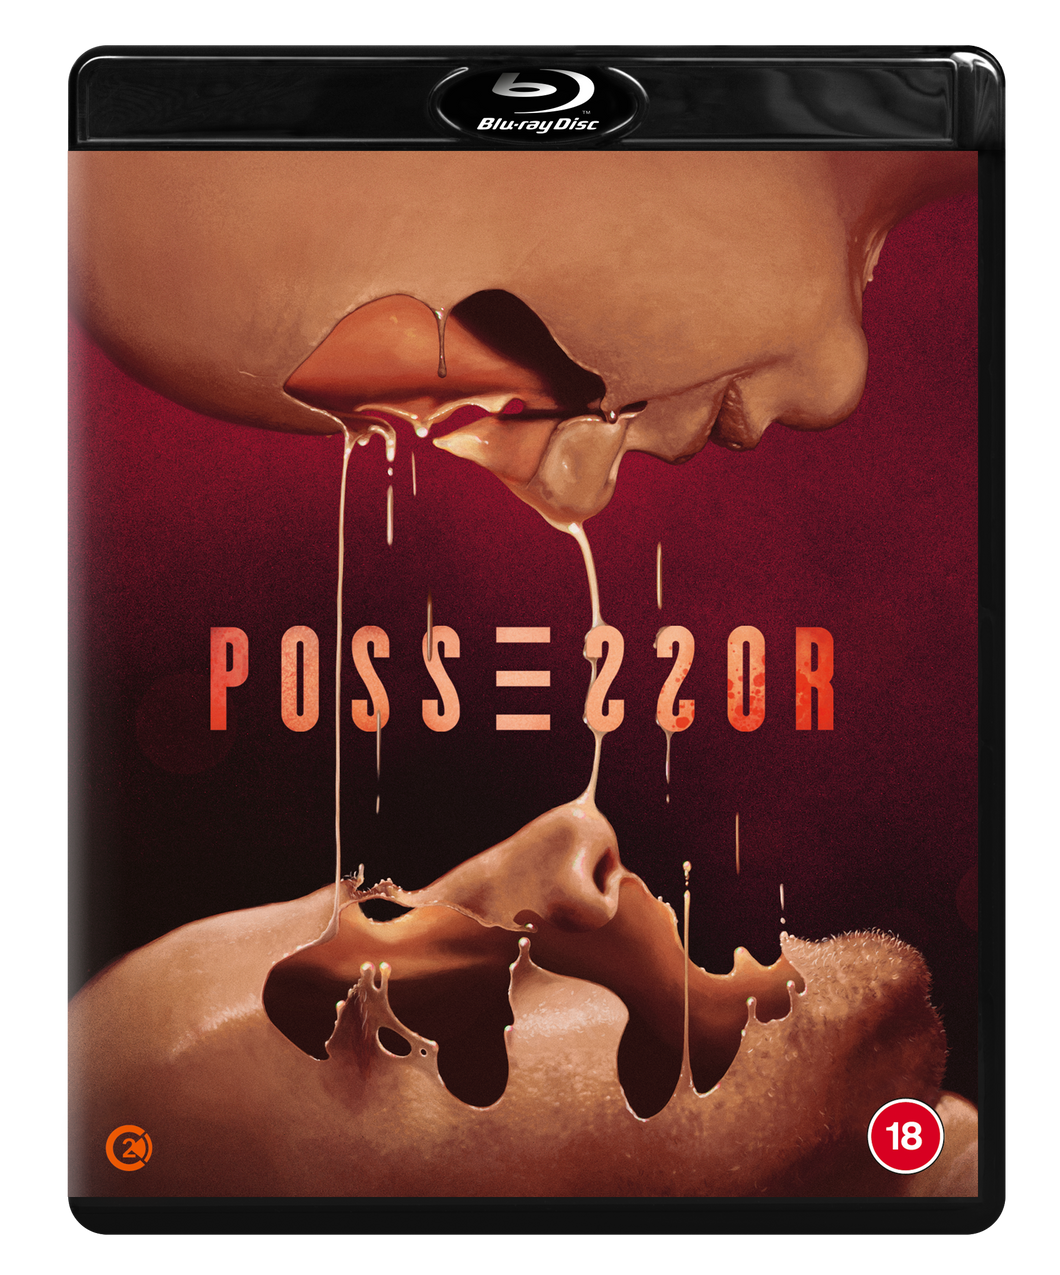 Possessor Blu-ray: Pre-Order Available March 18th